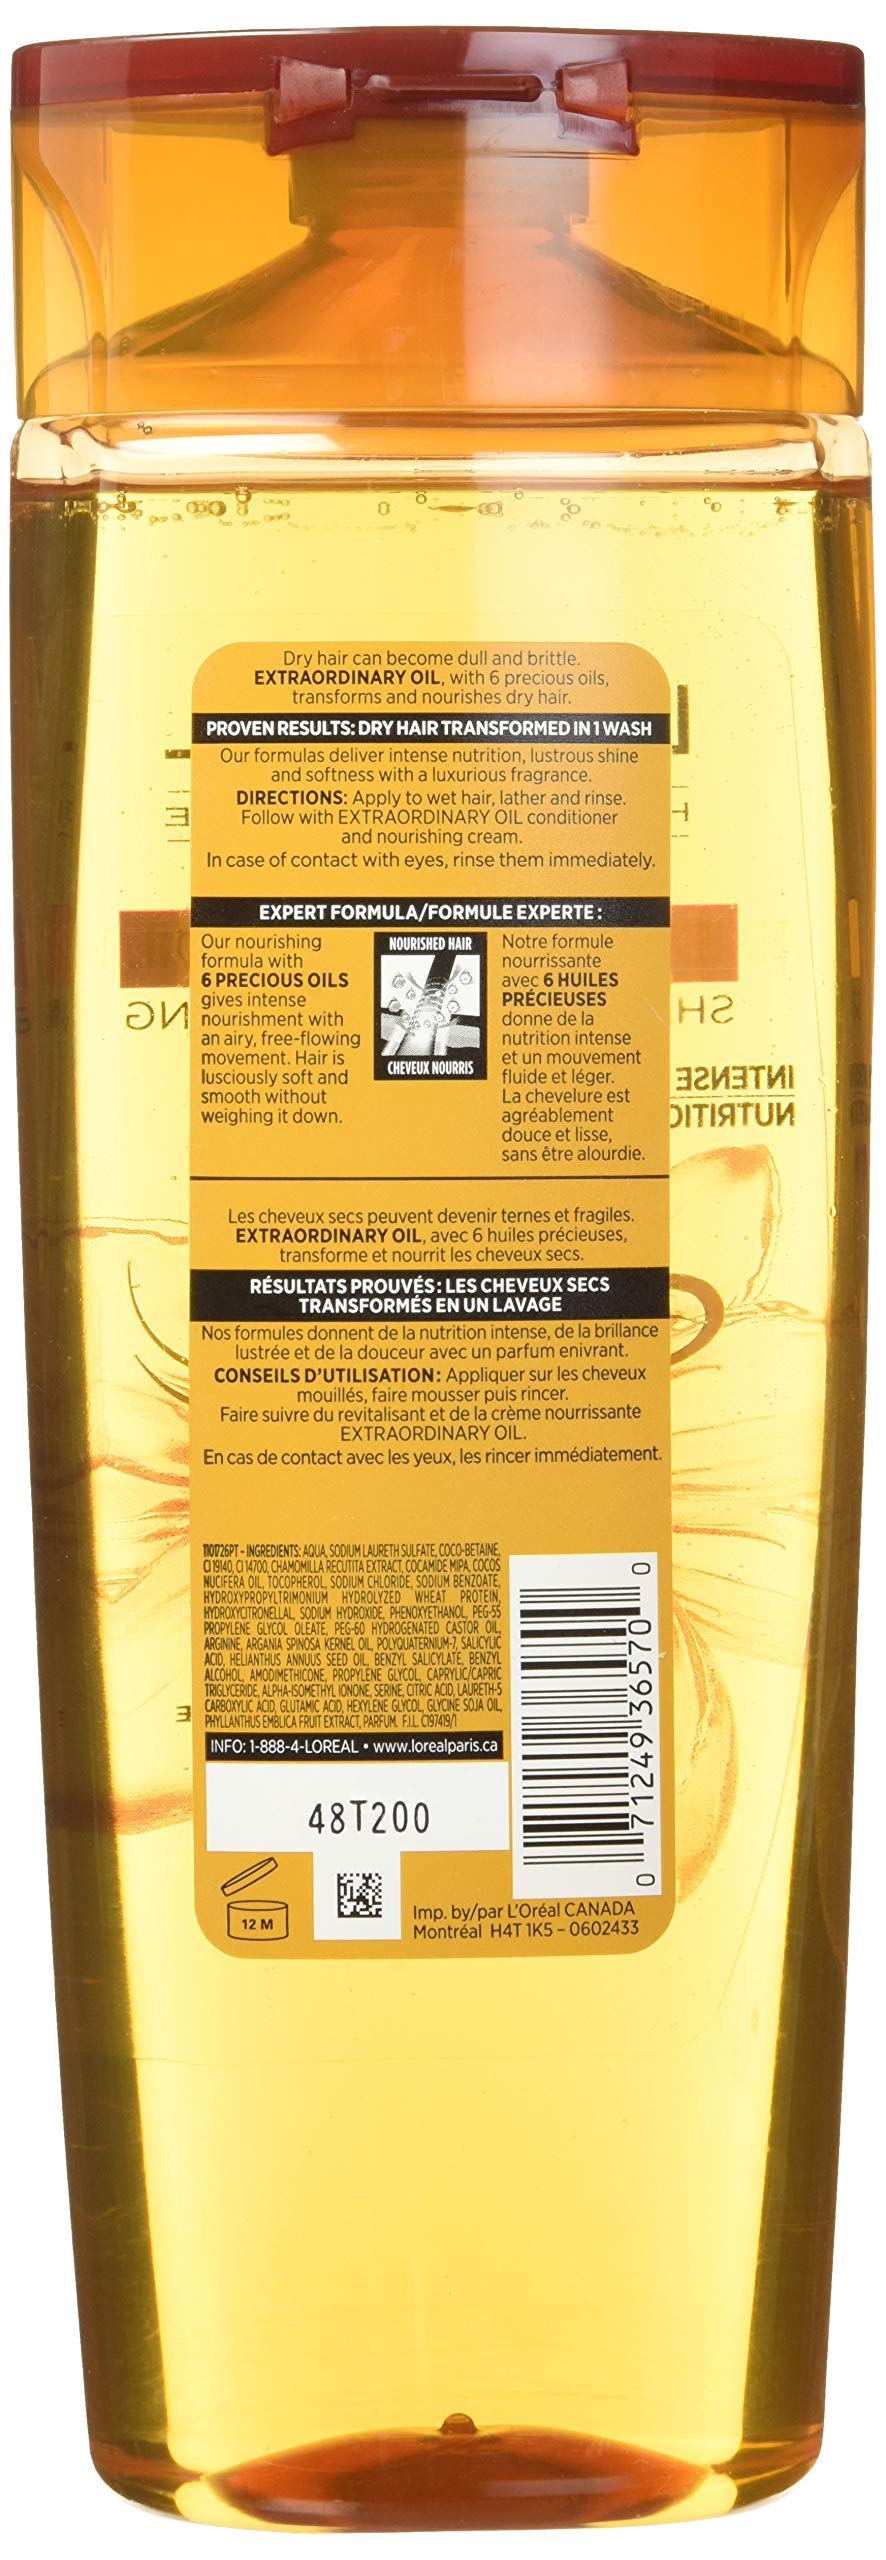 L'Oreal Paris Hair Expertise Extraordinary Oil Shampoo for Dry, Normal and Fine Hair, Packaging May Vary, 591ml